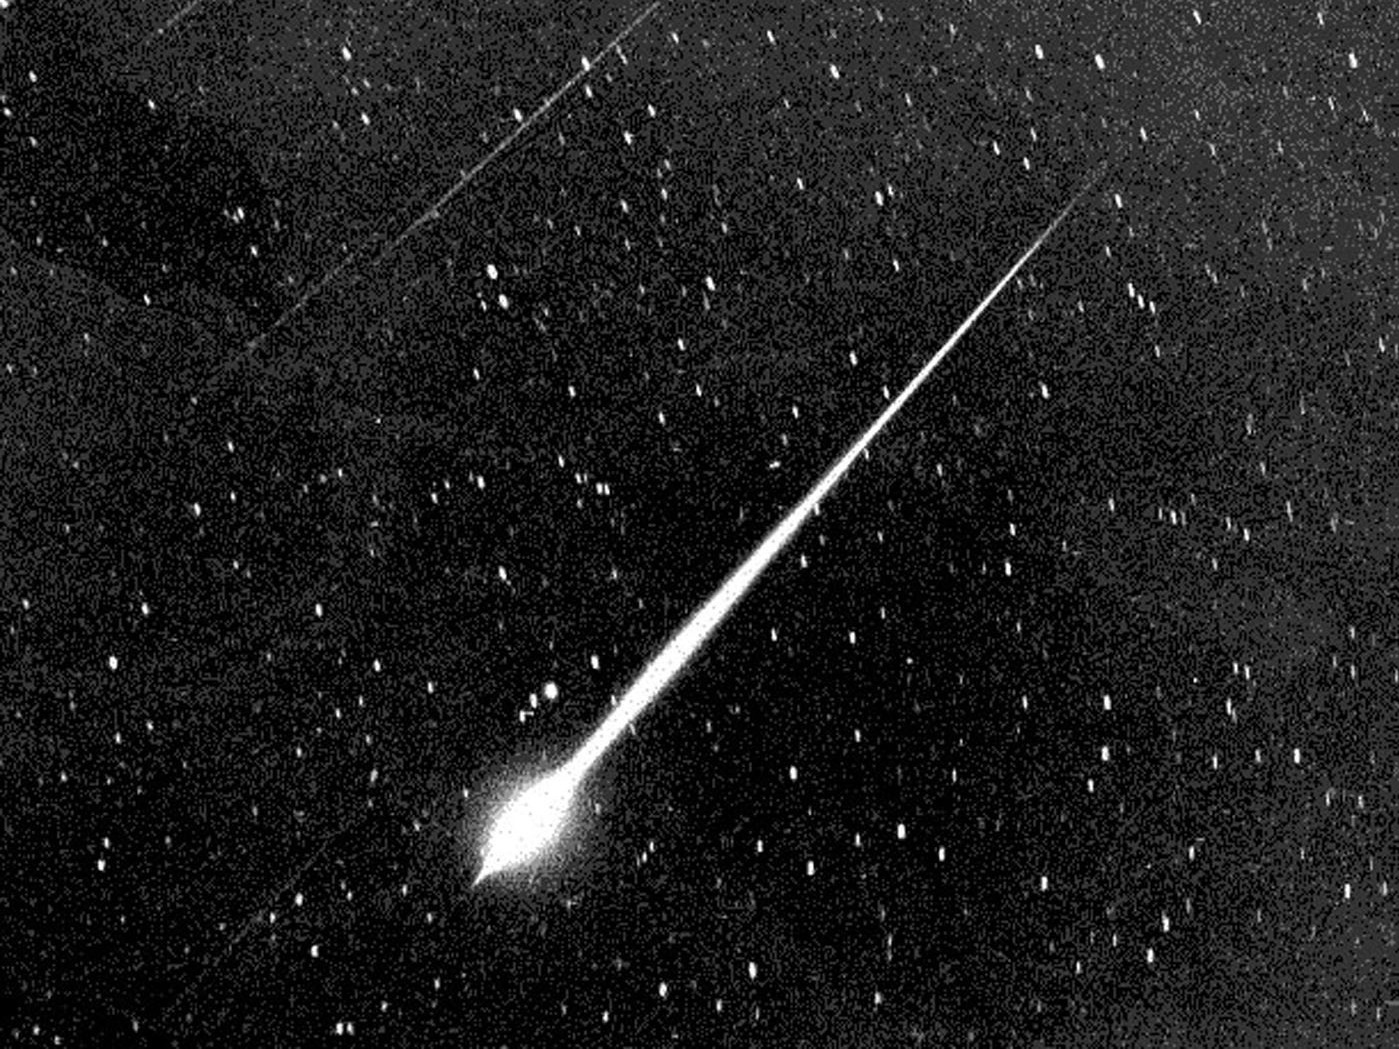 A Leonid fireball is shown during the storm of 1966 in the sky above Wrightwood, Calif.